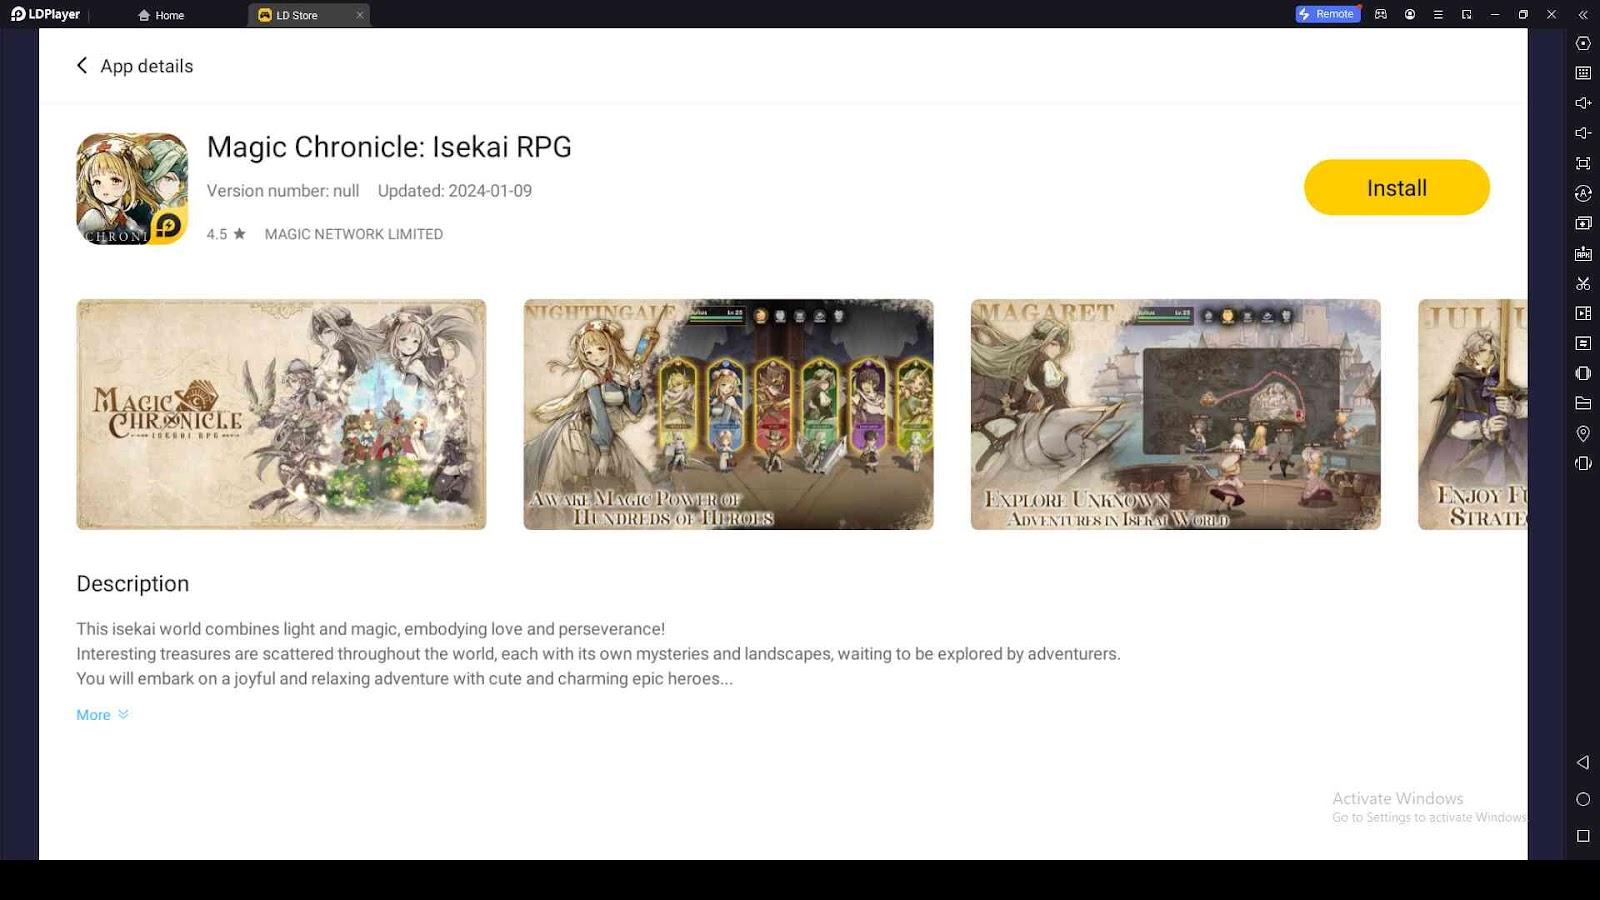 Playing Magic Chronicle: Isekai RPG on PC with LDPlayer